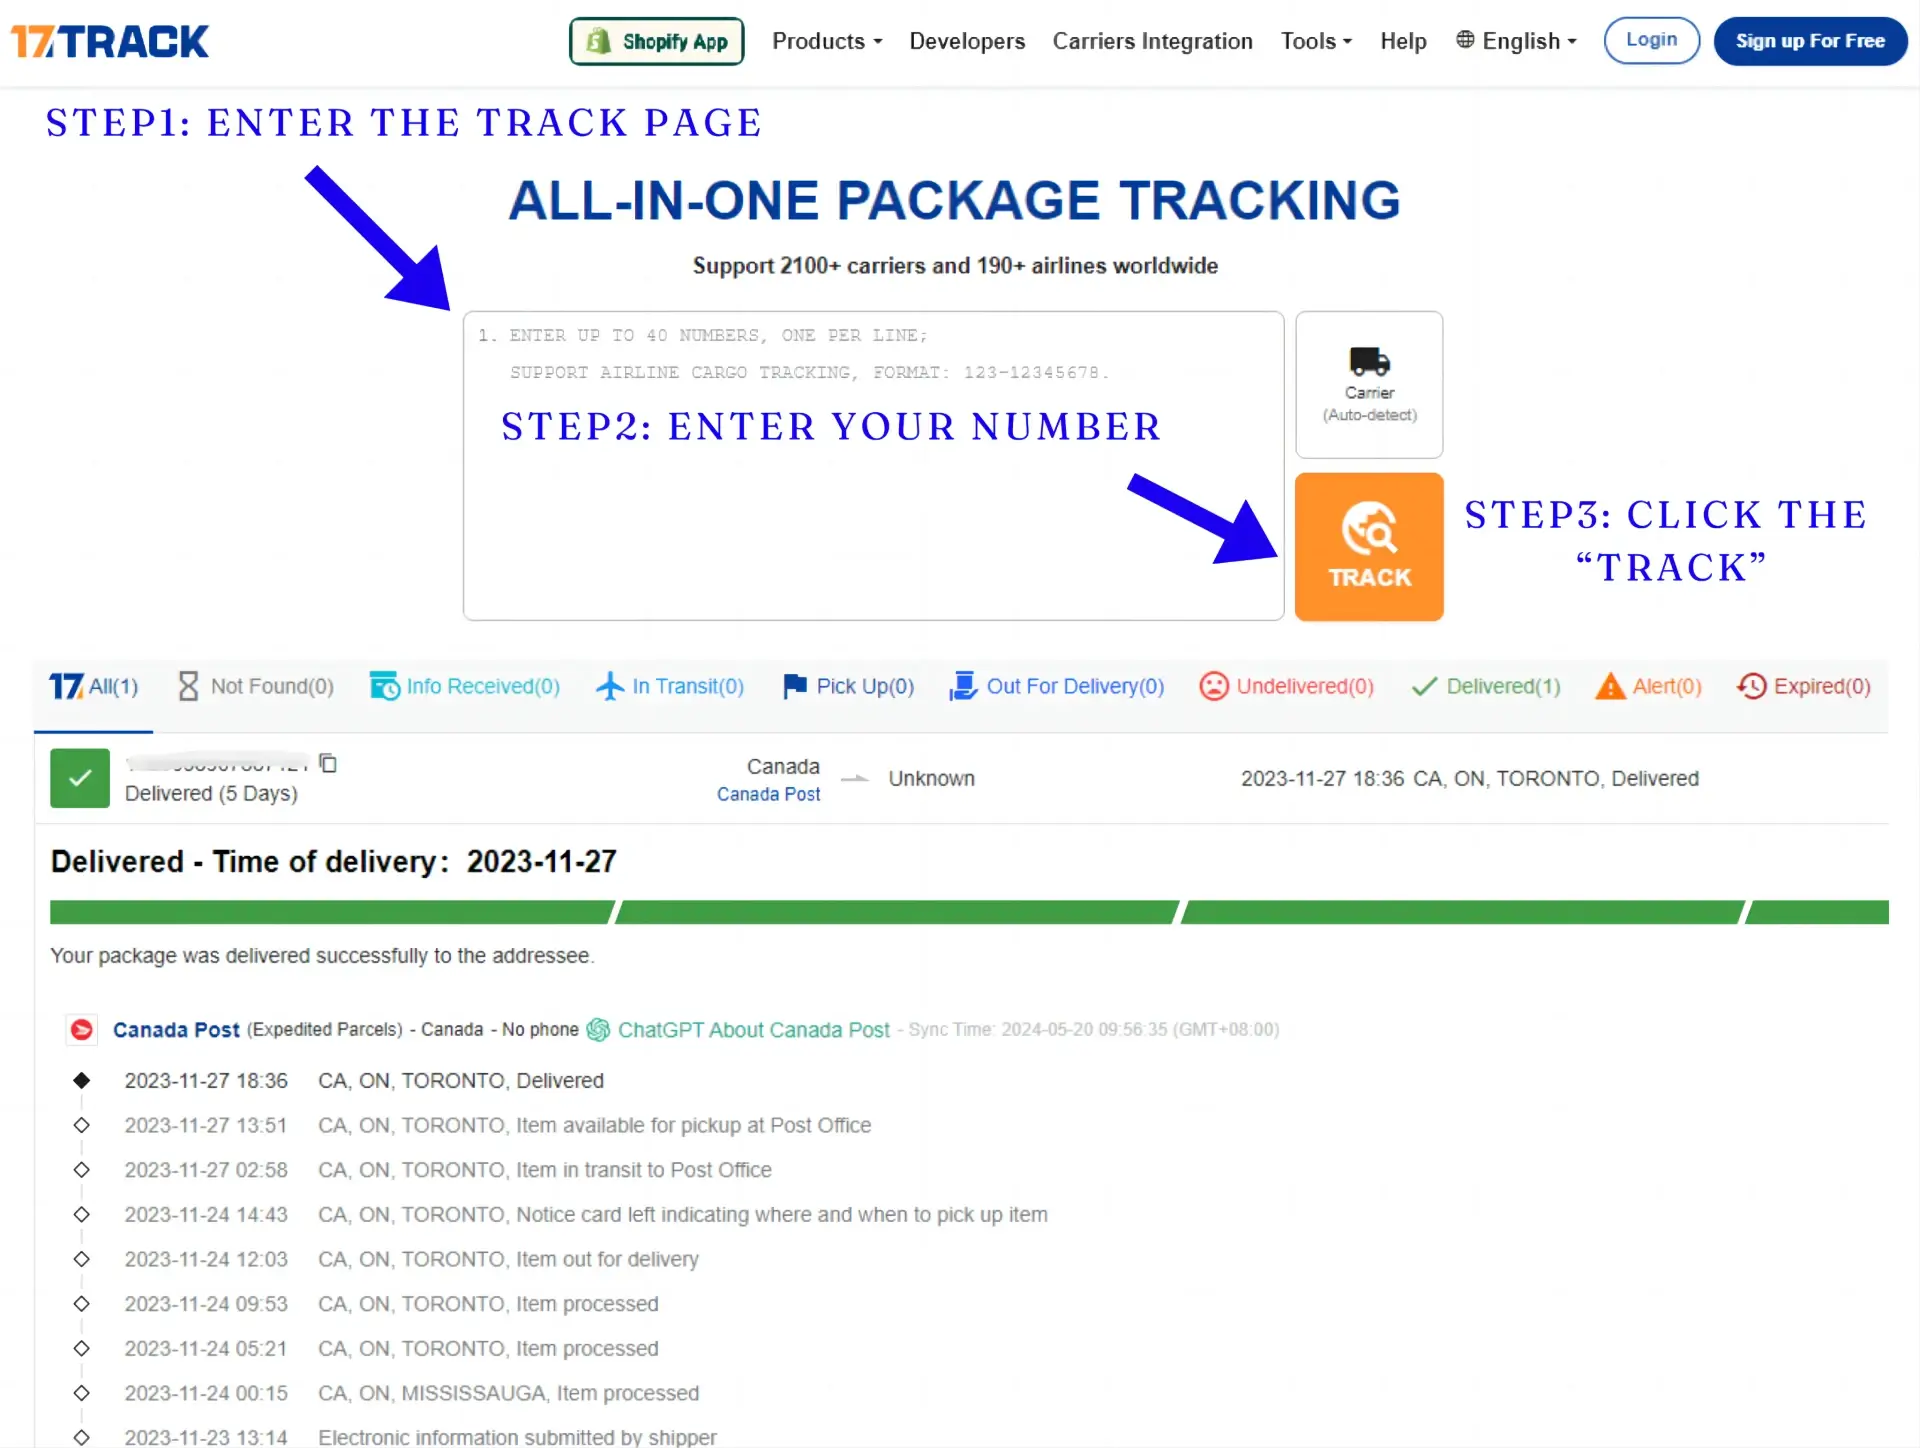 Canada Post Tracking. Learn how to find your tracking number on 17TRACK. Enter your tracking number on the 17TRACK official website.